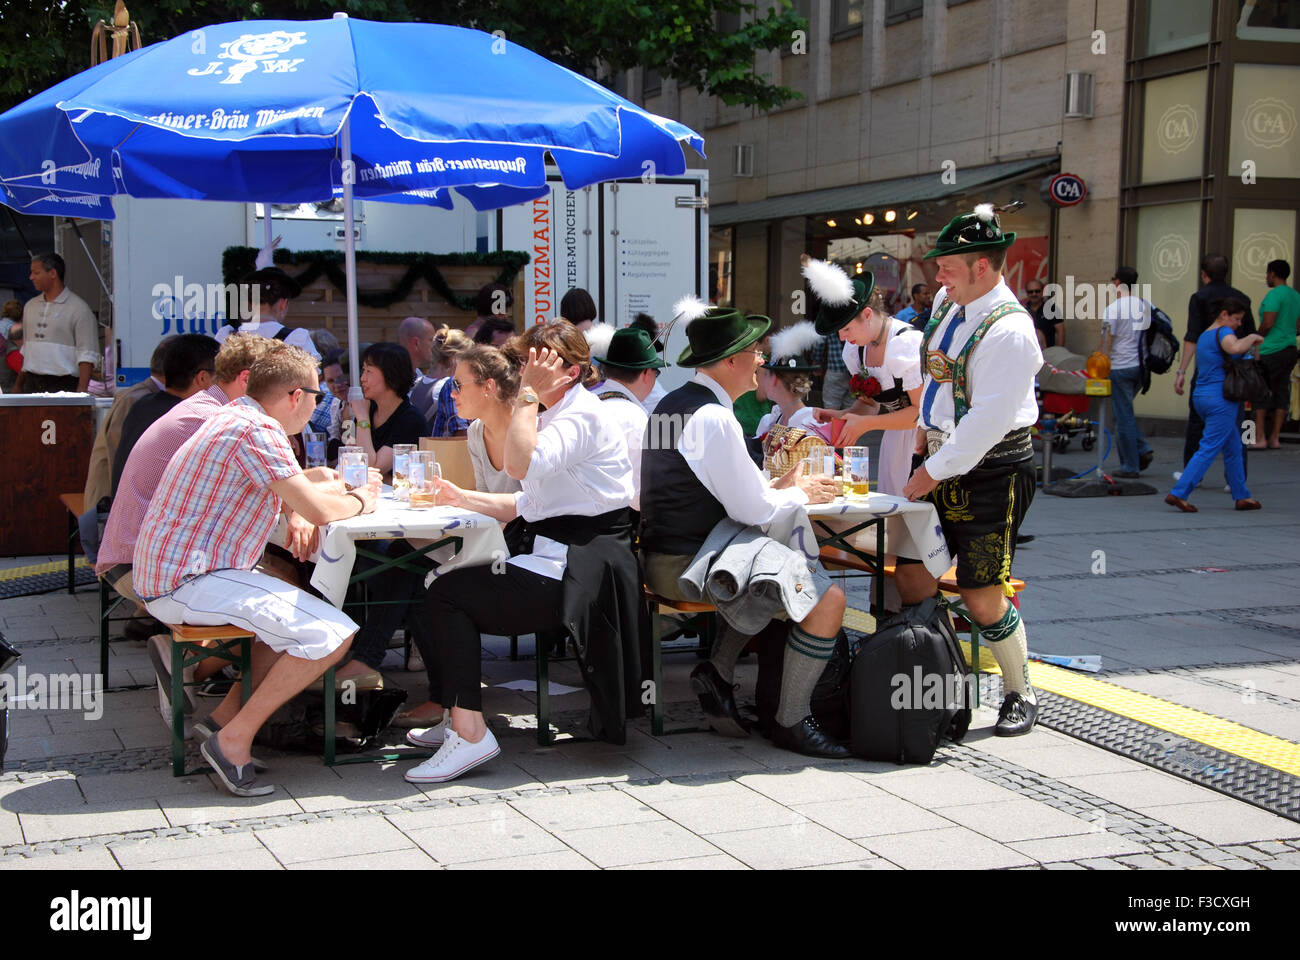 Munich, Germany -July 07: People having bear sitting in the street. Some dressed in traditional Bavarian dress clothes some with Stock Photo